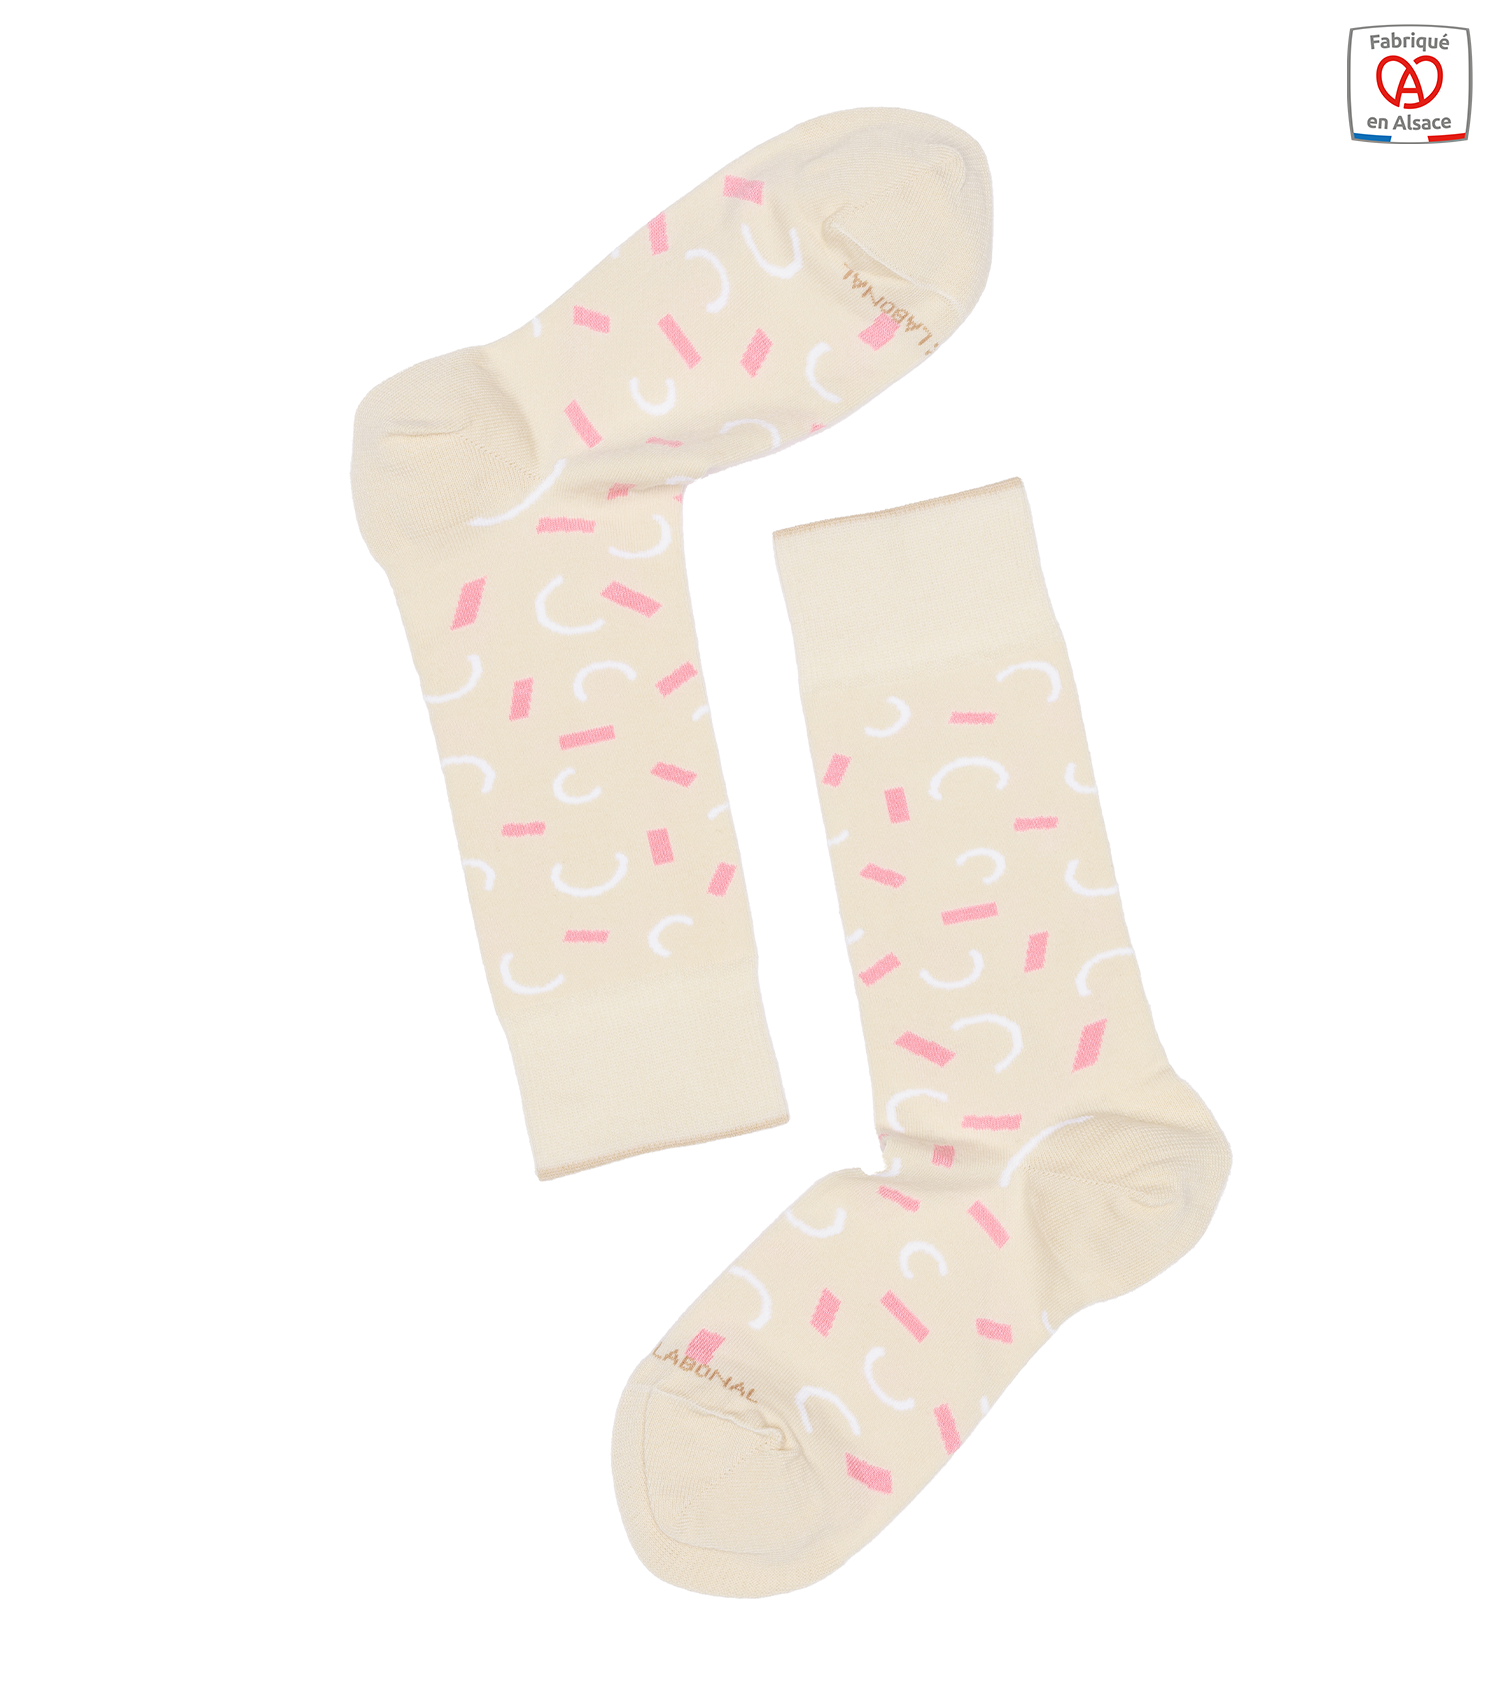 theim-chaussettes-flammekueche-alsacienne-homme-labonal-made-in-france-1500x1700px